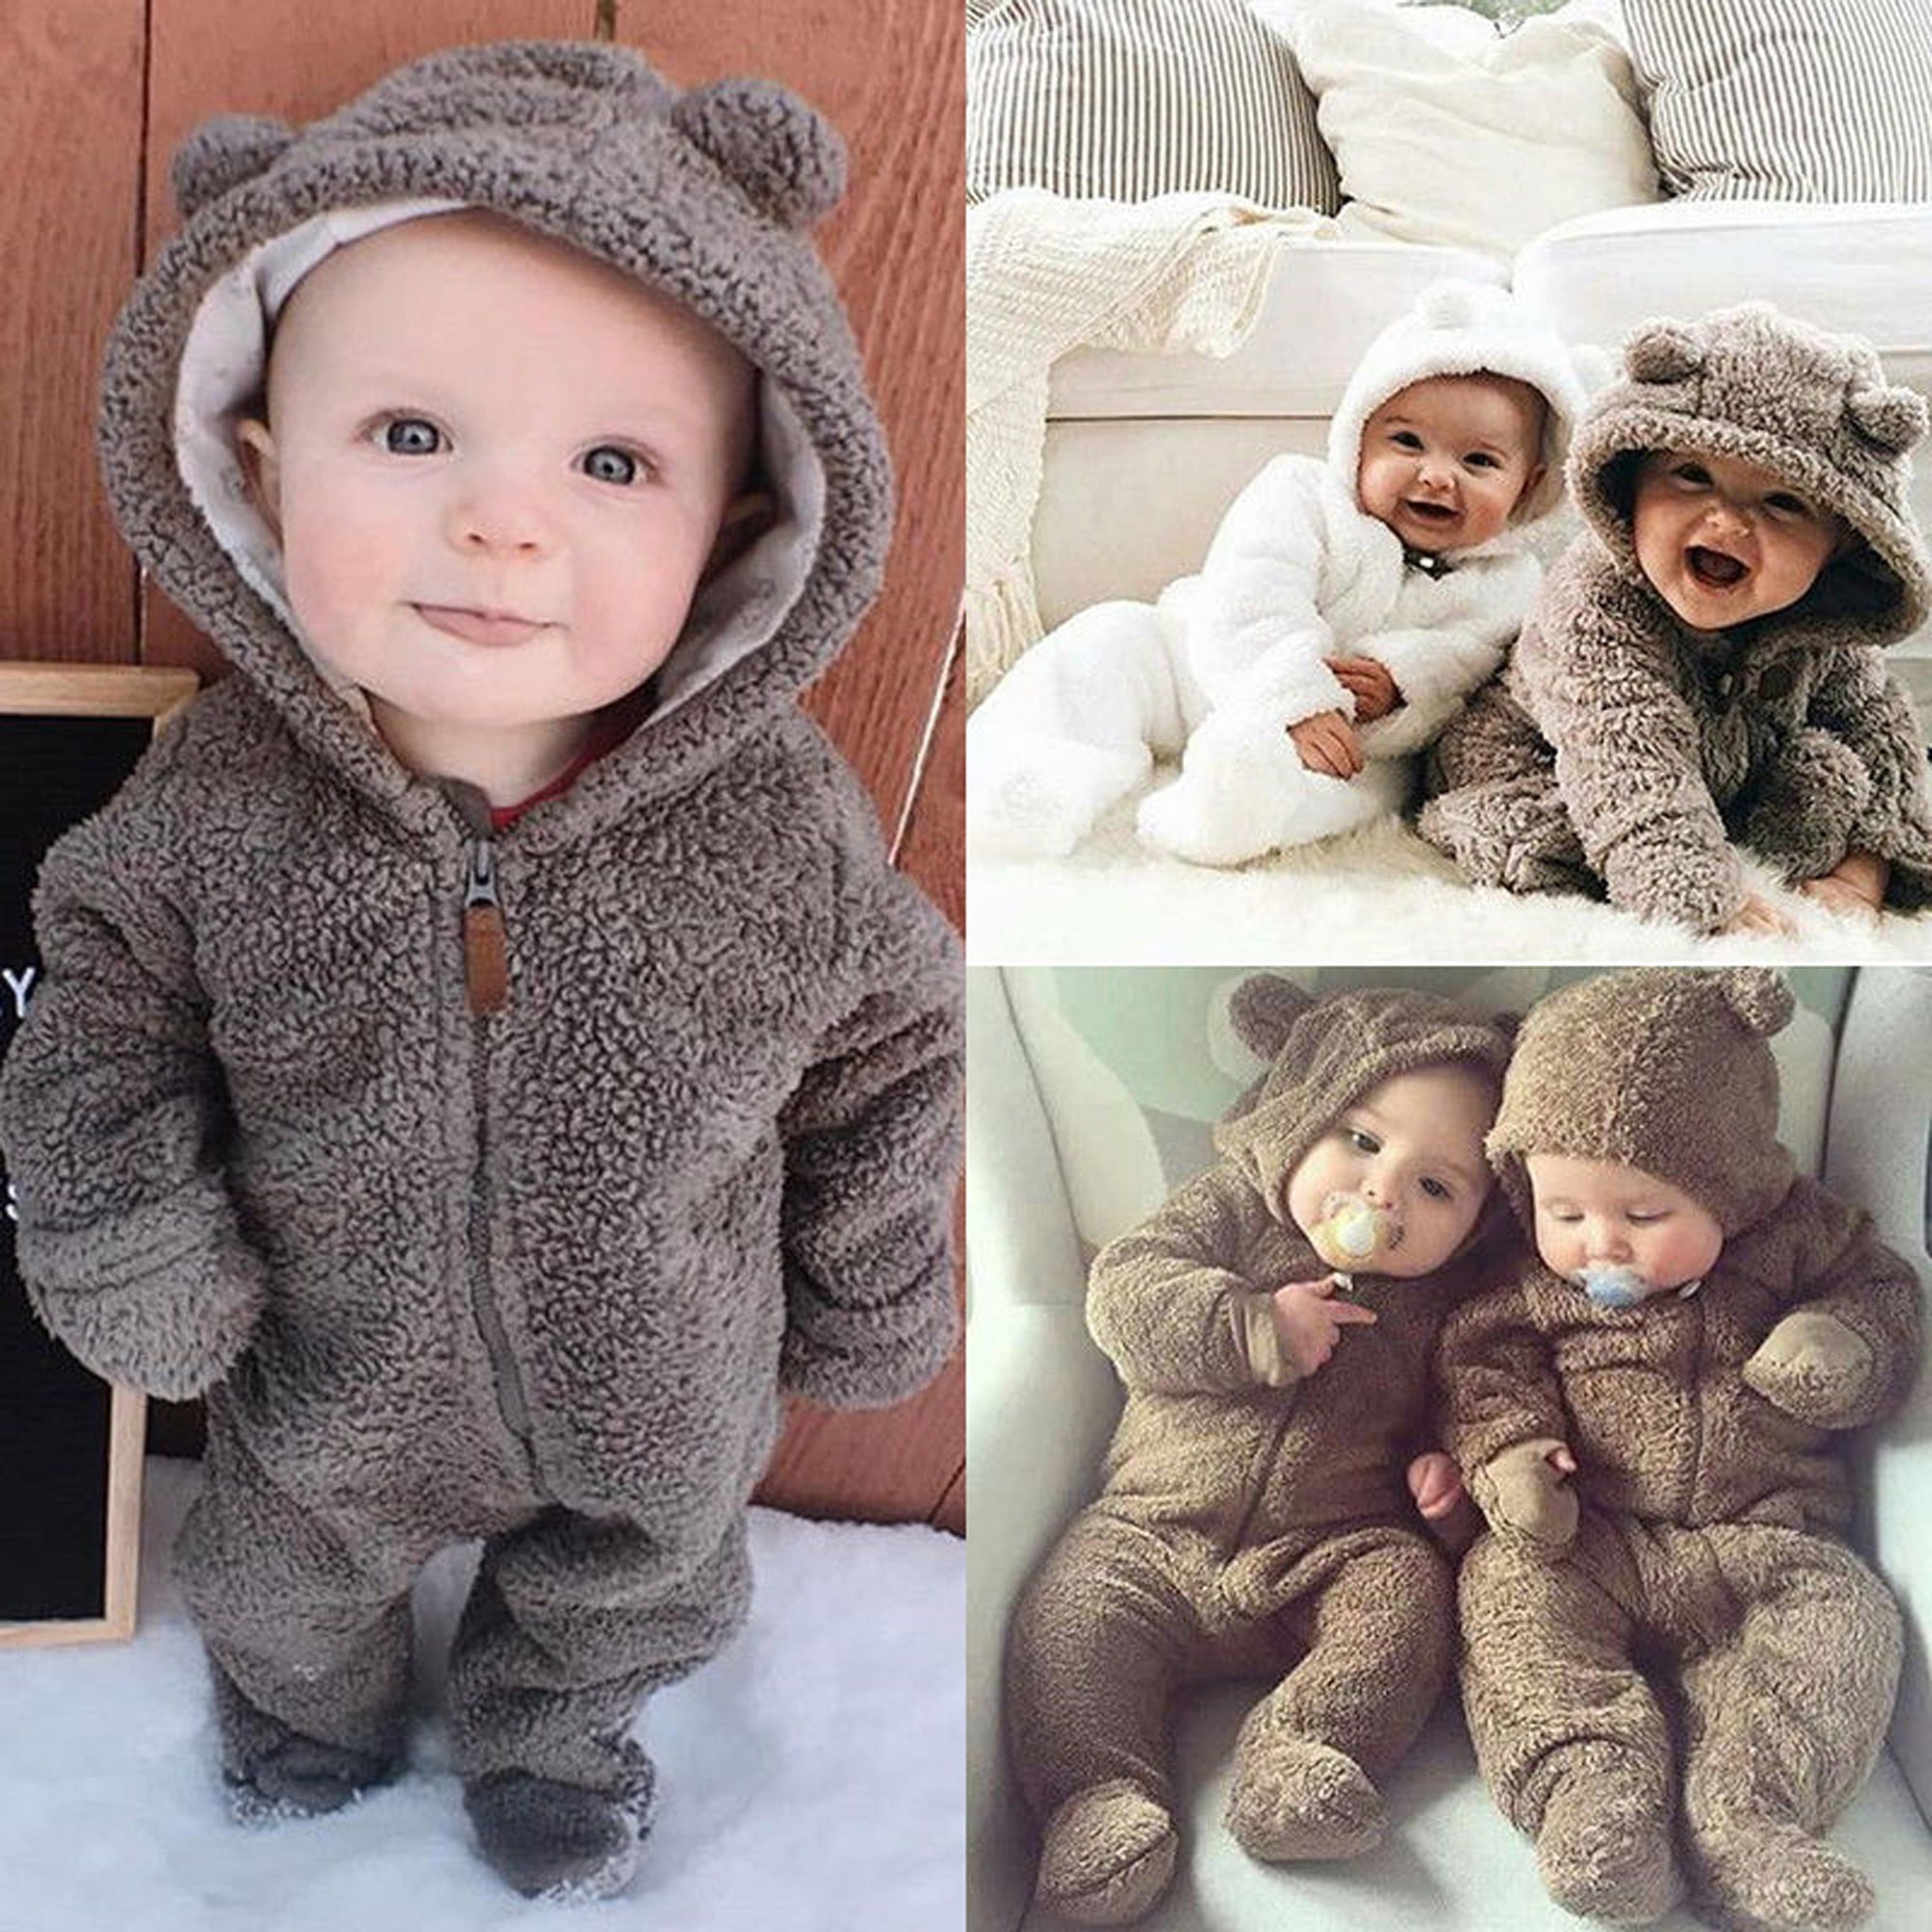 Top Baby Kids Boy Girl Infant Hooded Romper Jumpsuit Bodysuit Clothes Outfit Set 